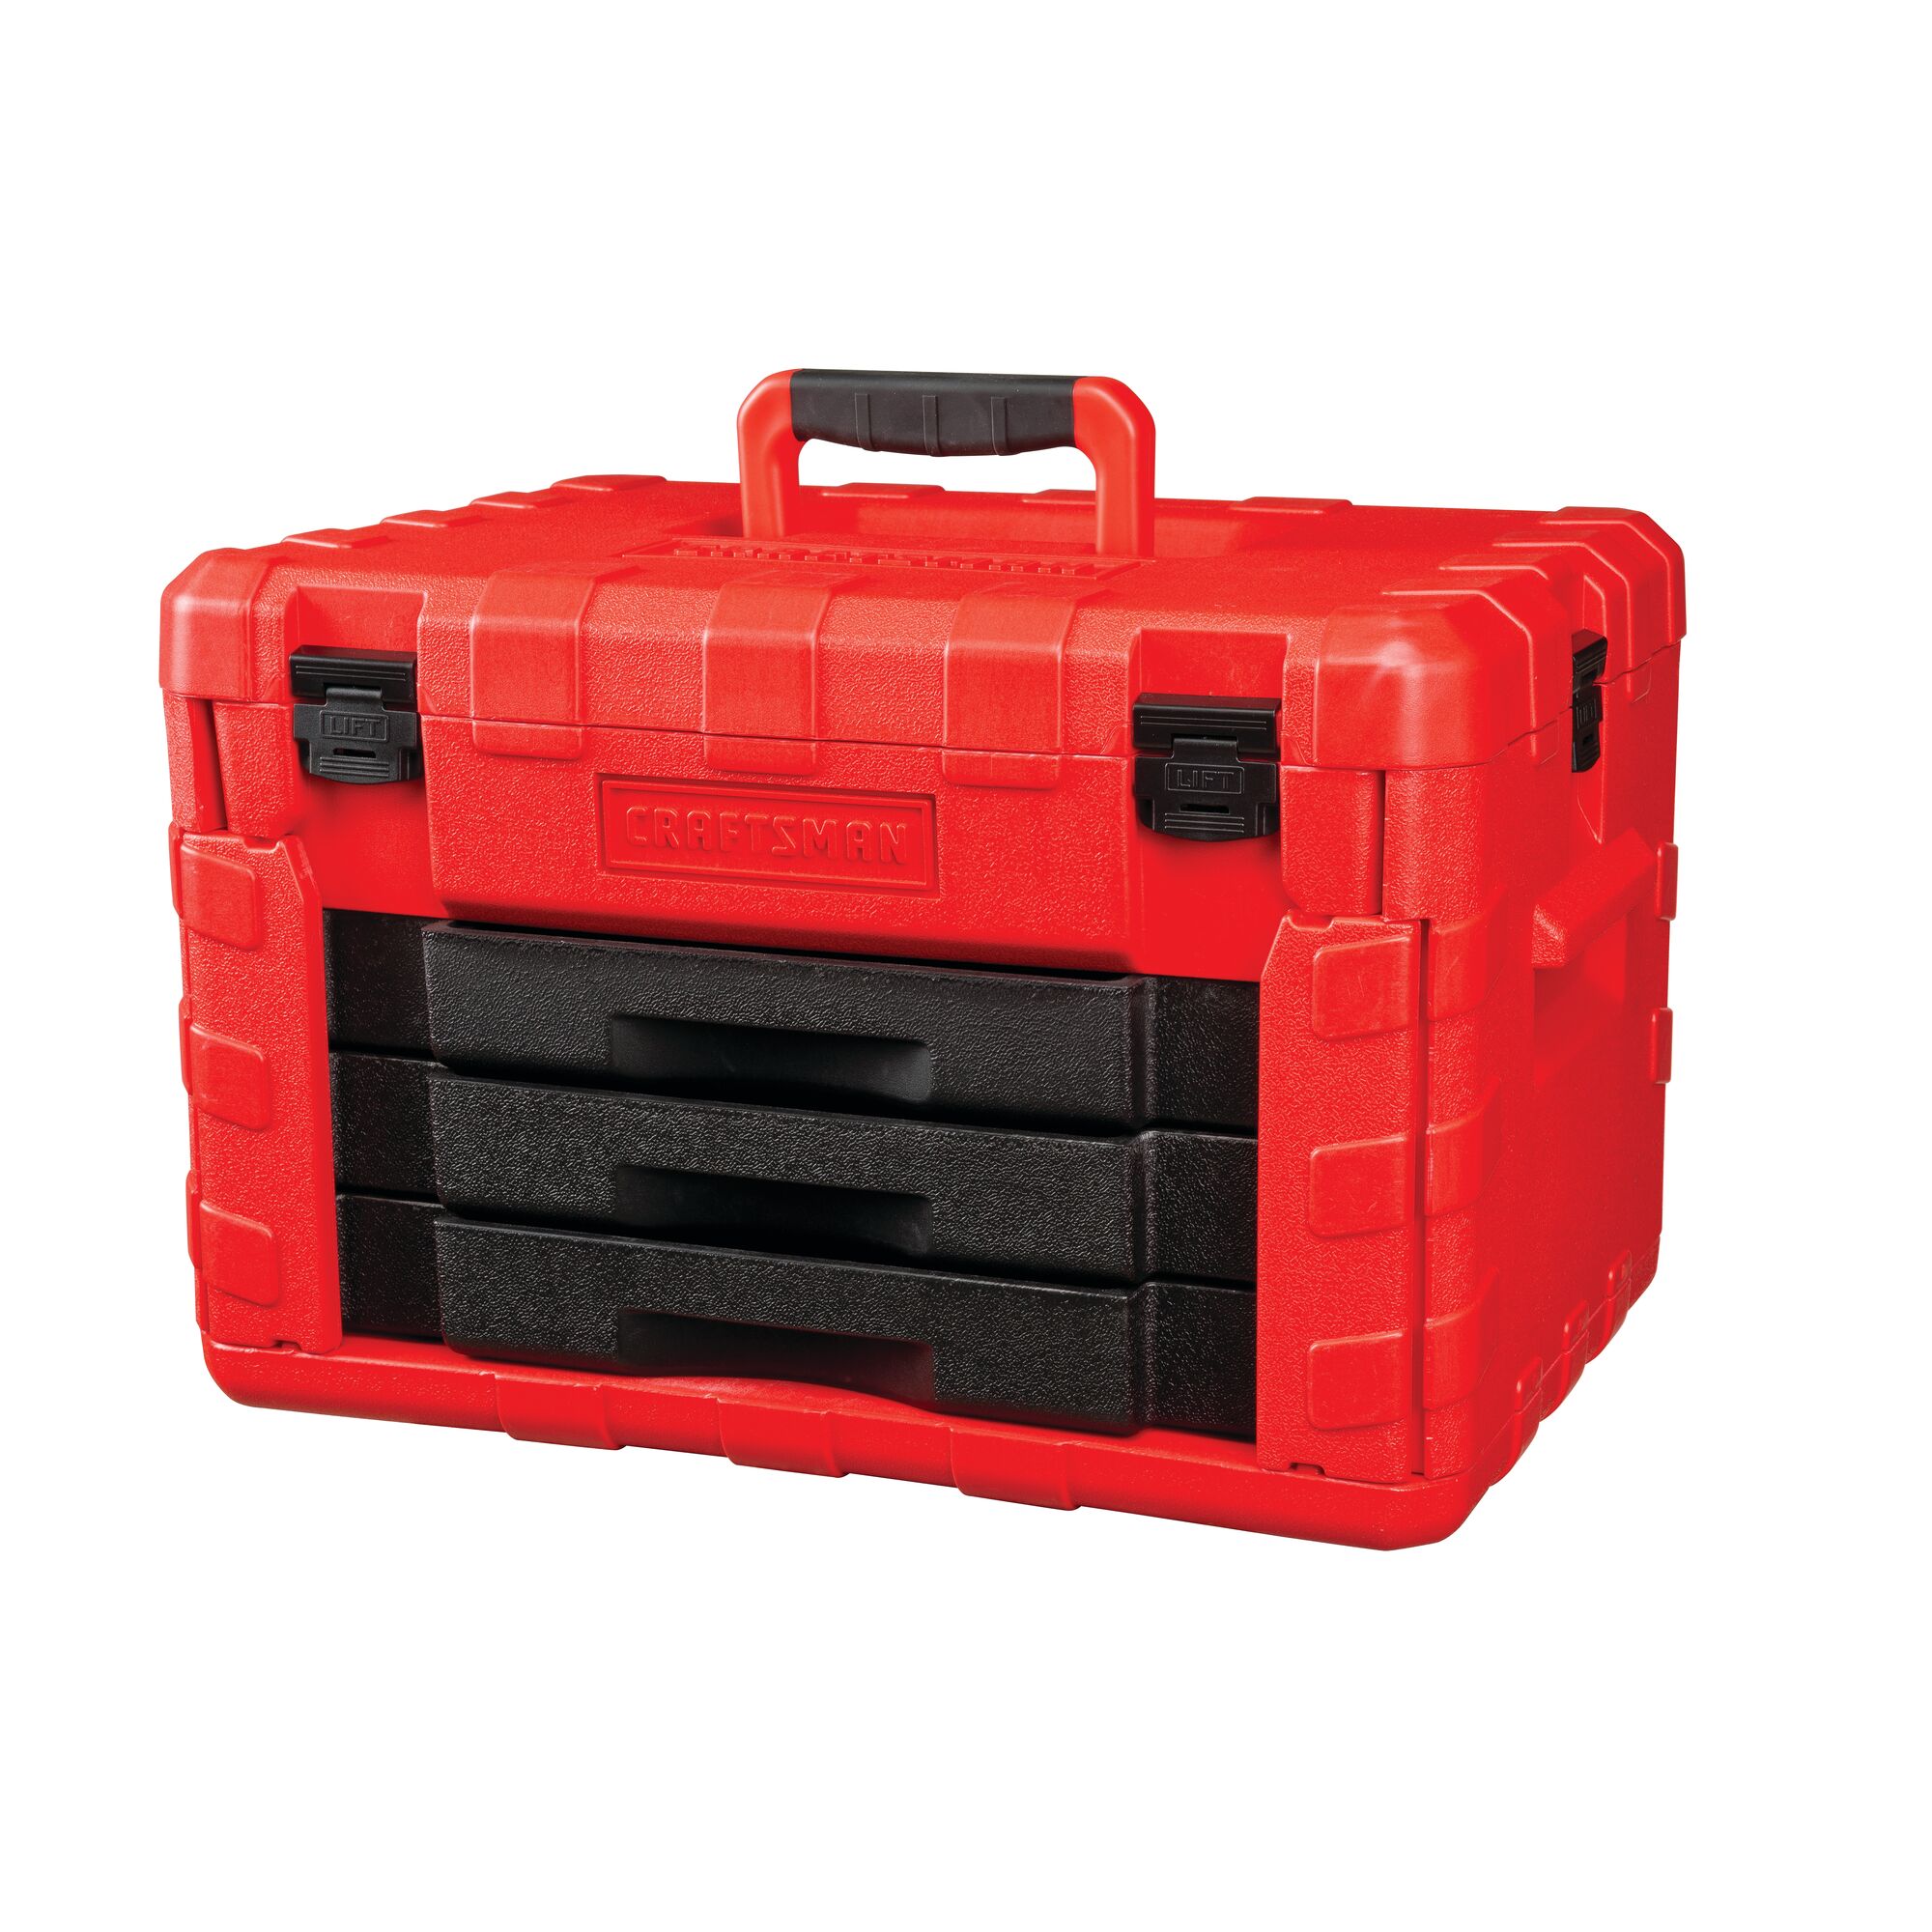 73 Compartment Durable Plastic Storage Tool Box in Red